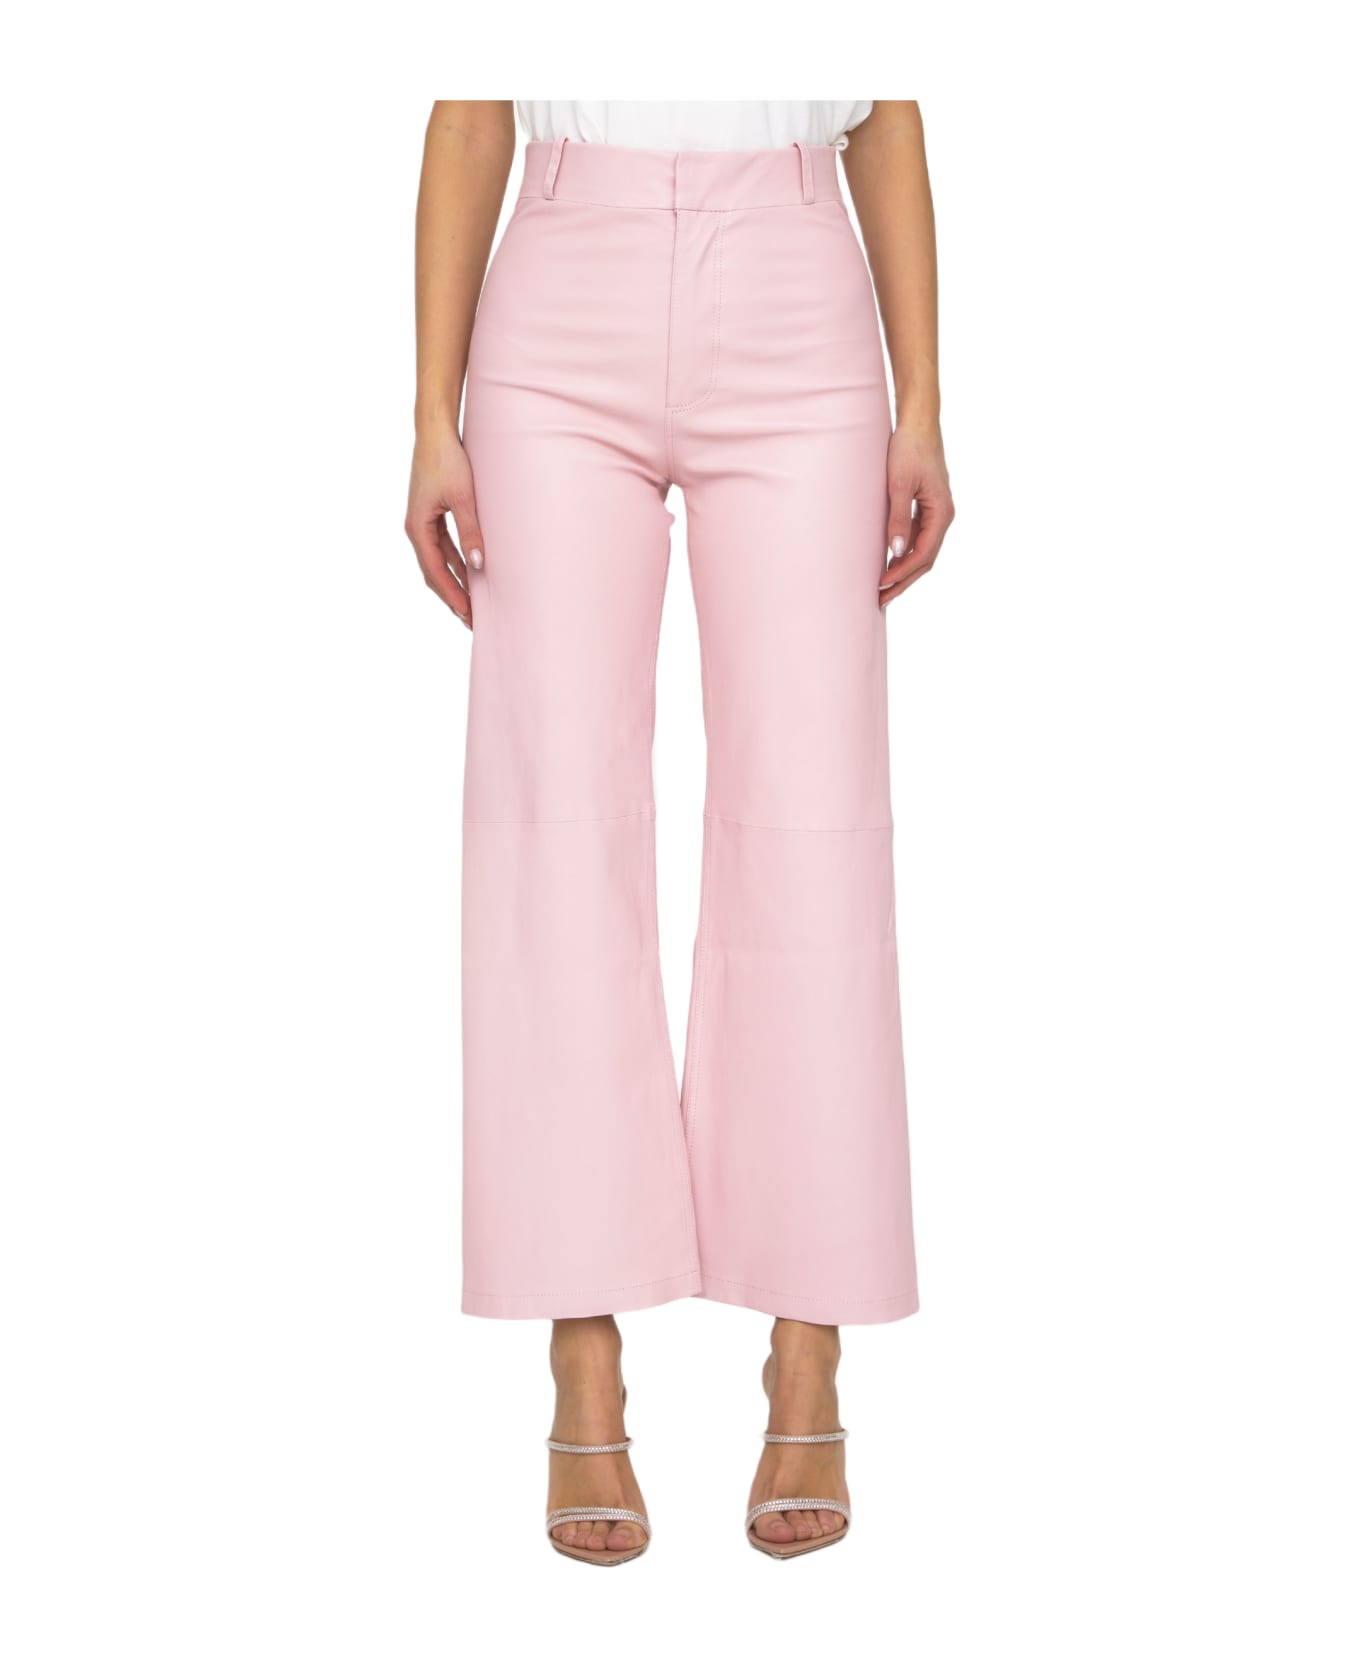 ARMA Stretch Palazzo Trousers - PINK